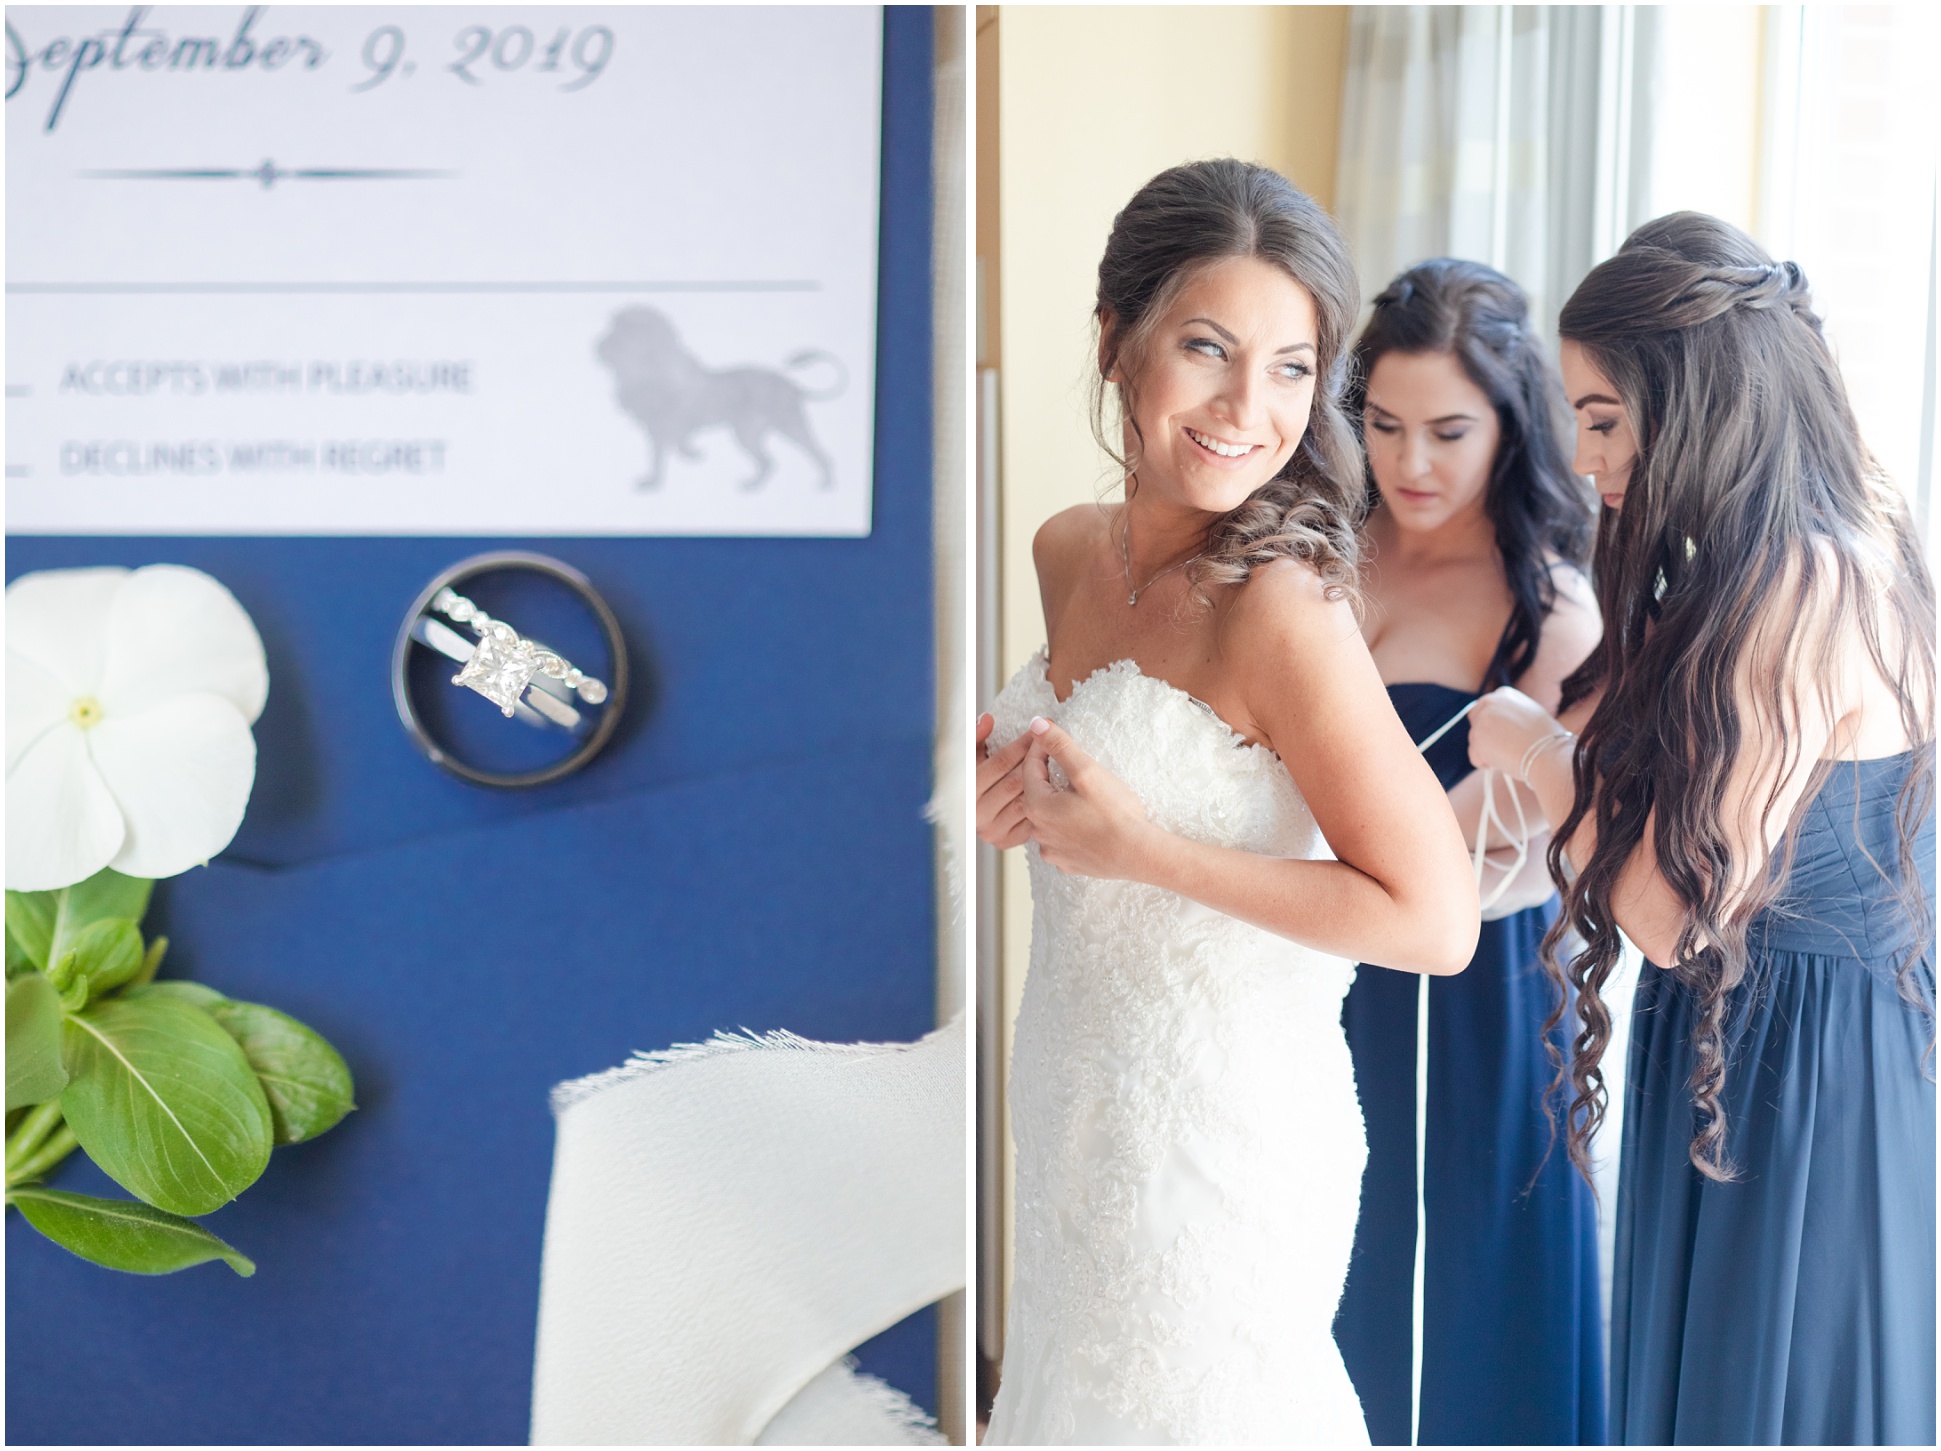 Left: rings on the blue invitation, right: bride getting into her dress